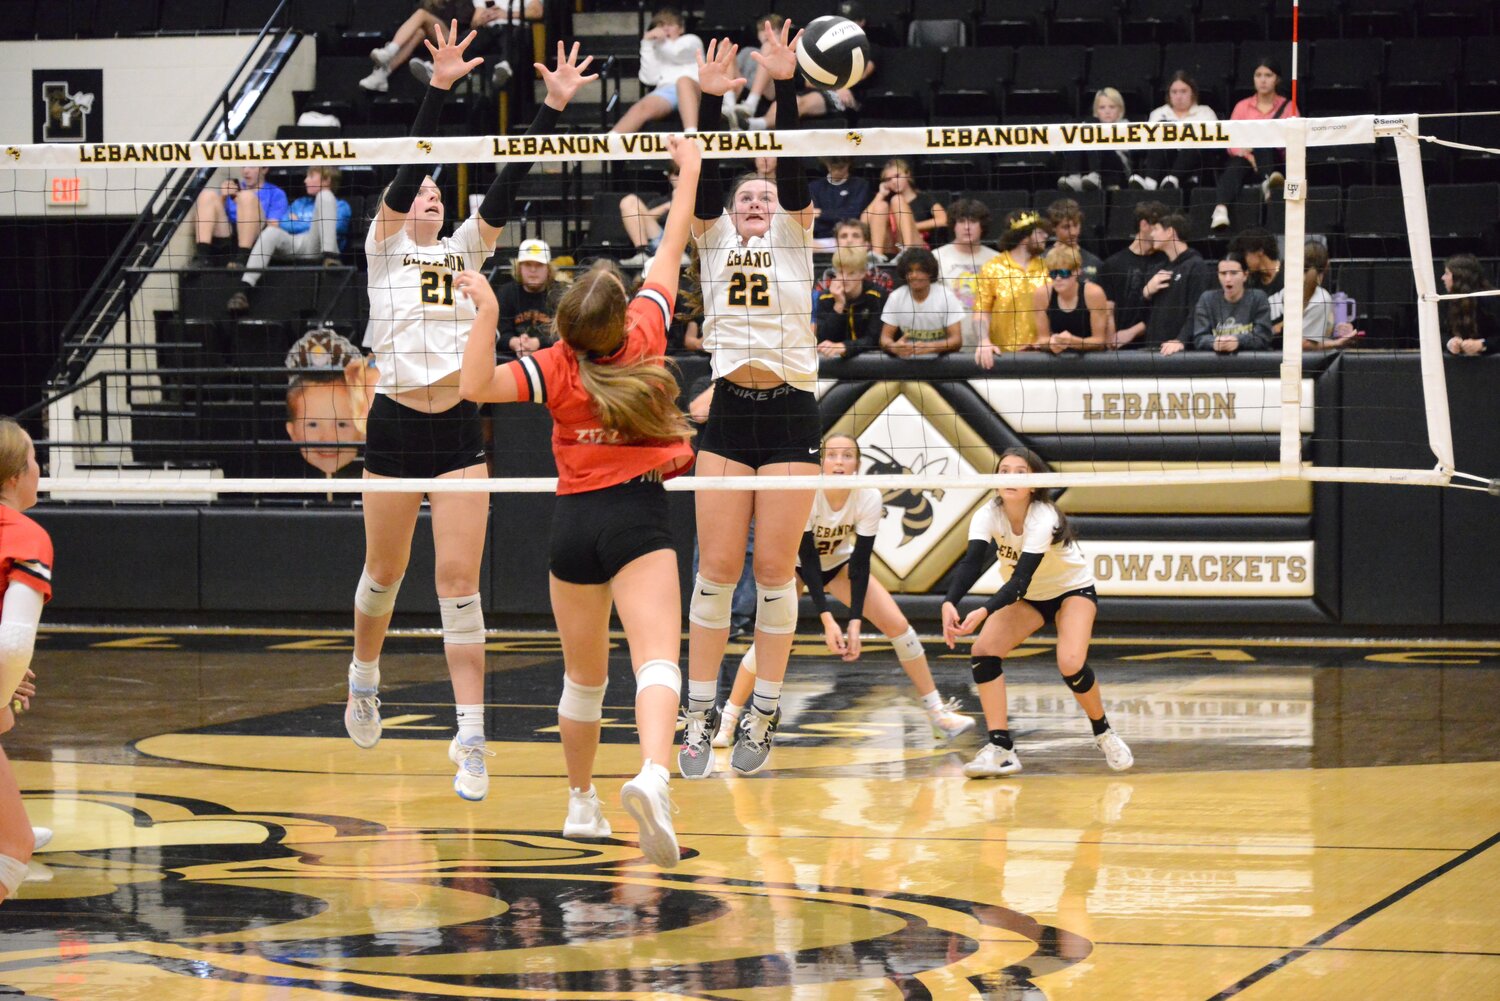 Kaidynce Buttram and Saylor Helton put up a wall of hands to stop the volleyball from entering 'Jacket territory.